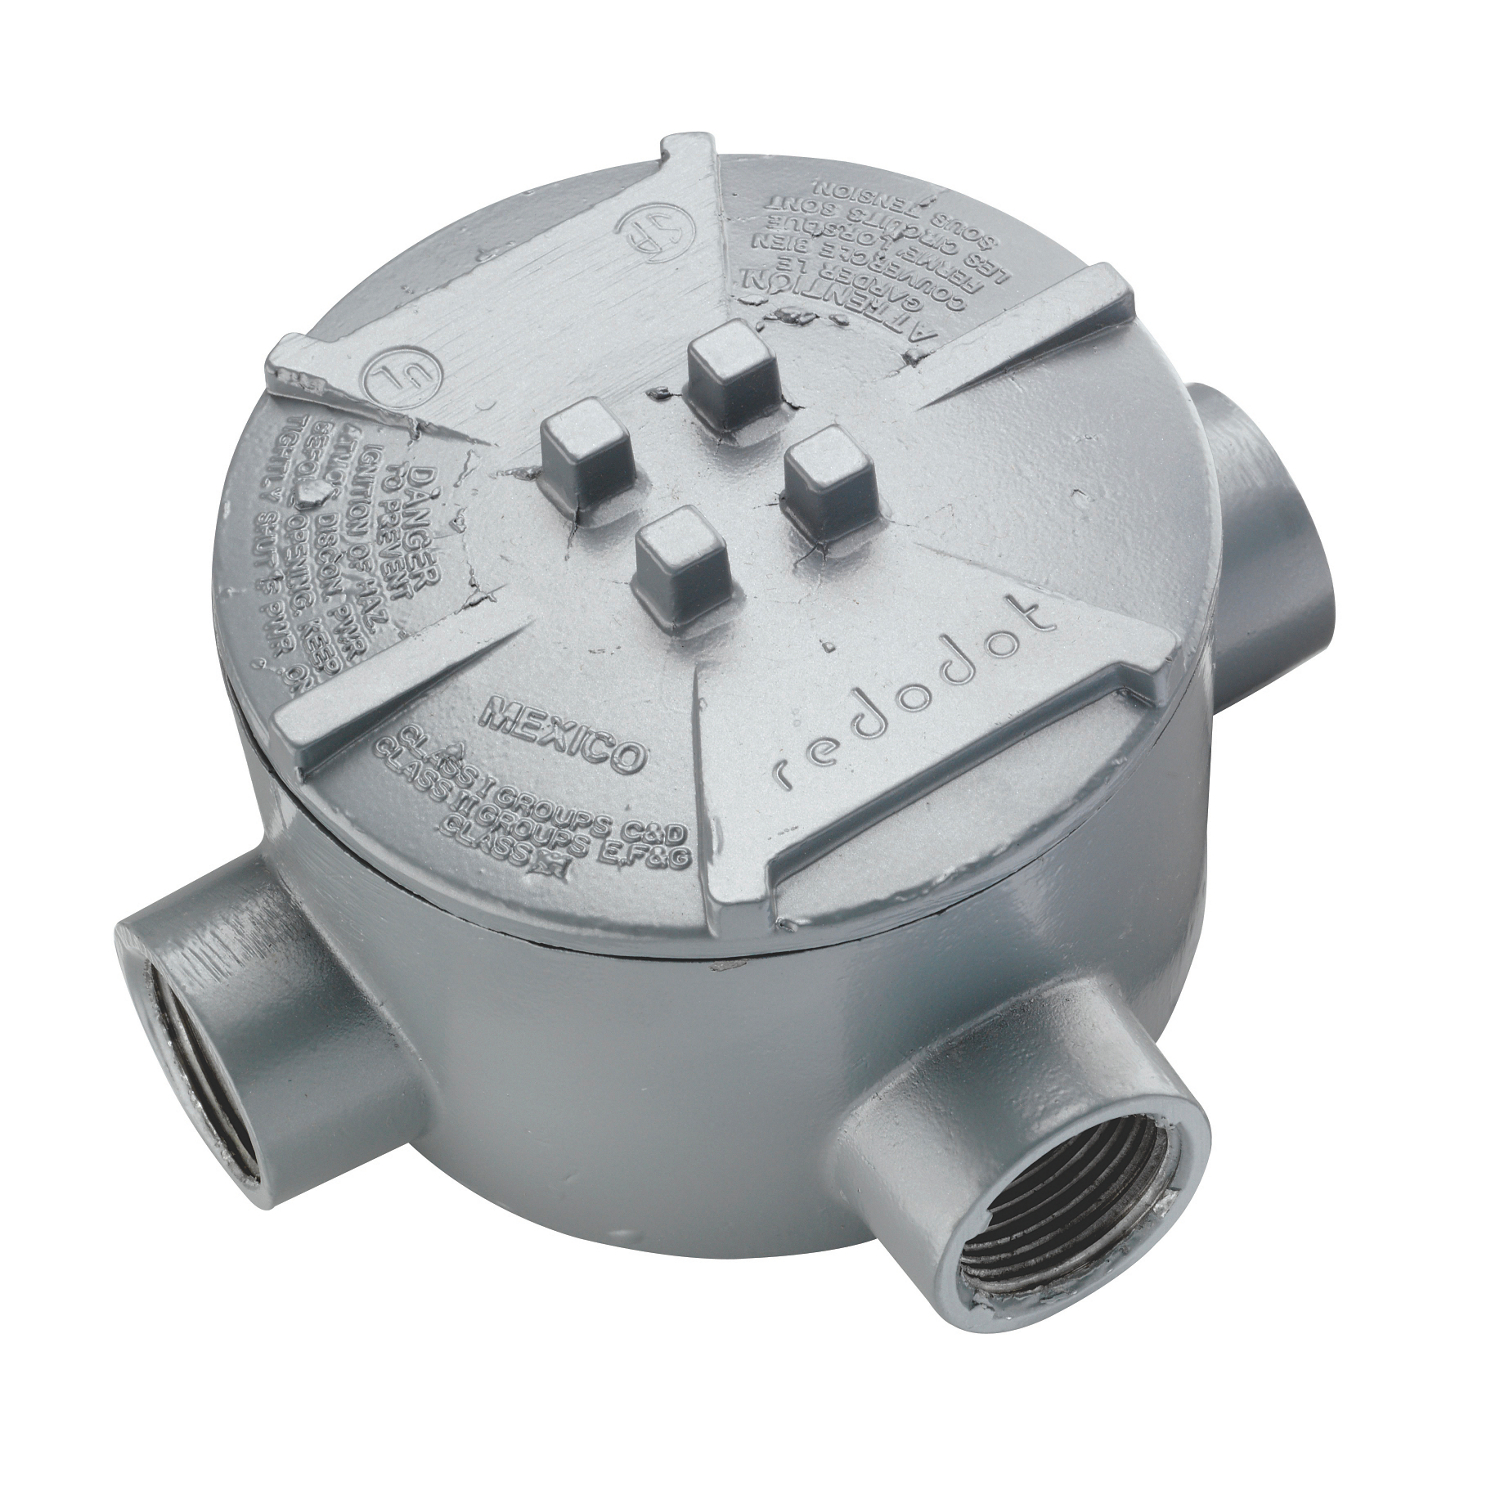 GAX-3 Conduit Outlet Box Ocal;ABB - Installation Products